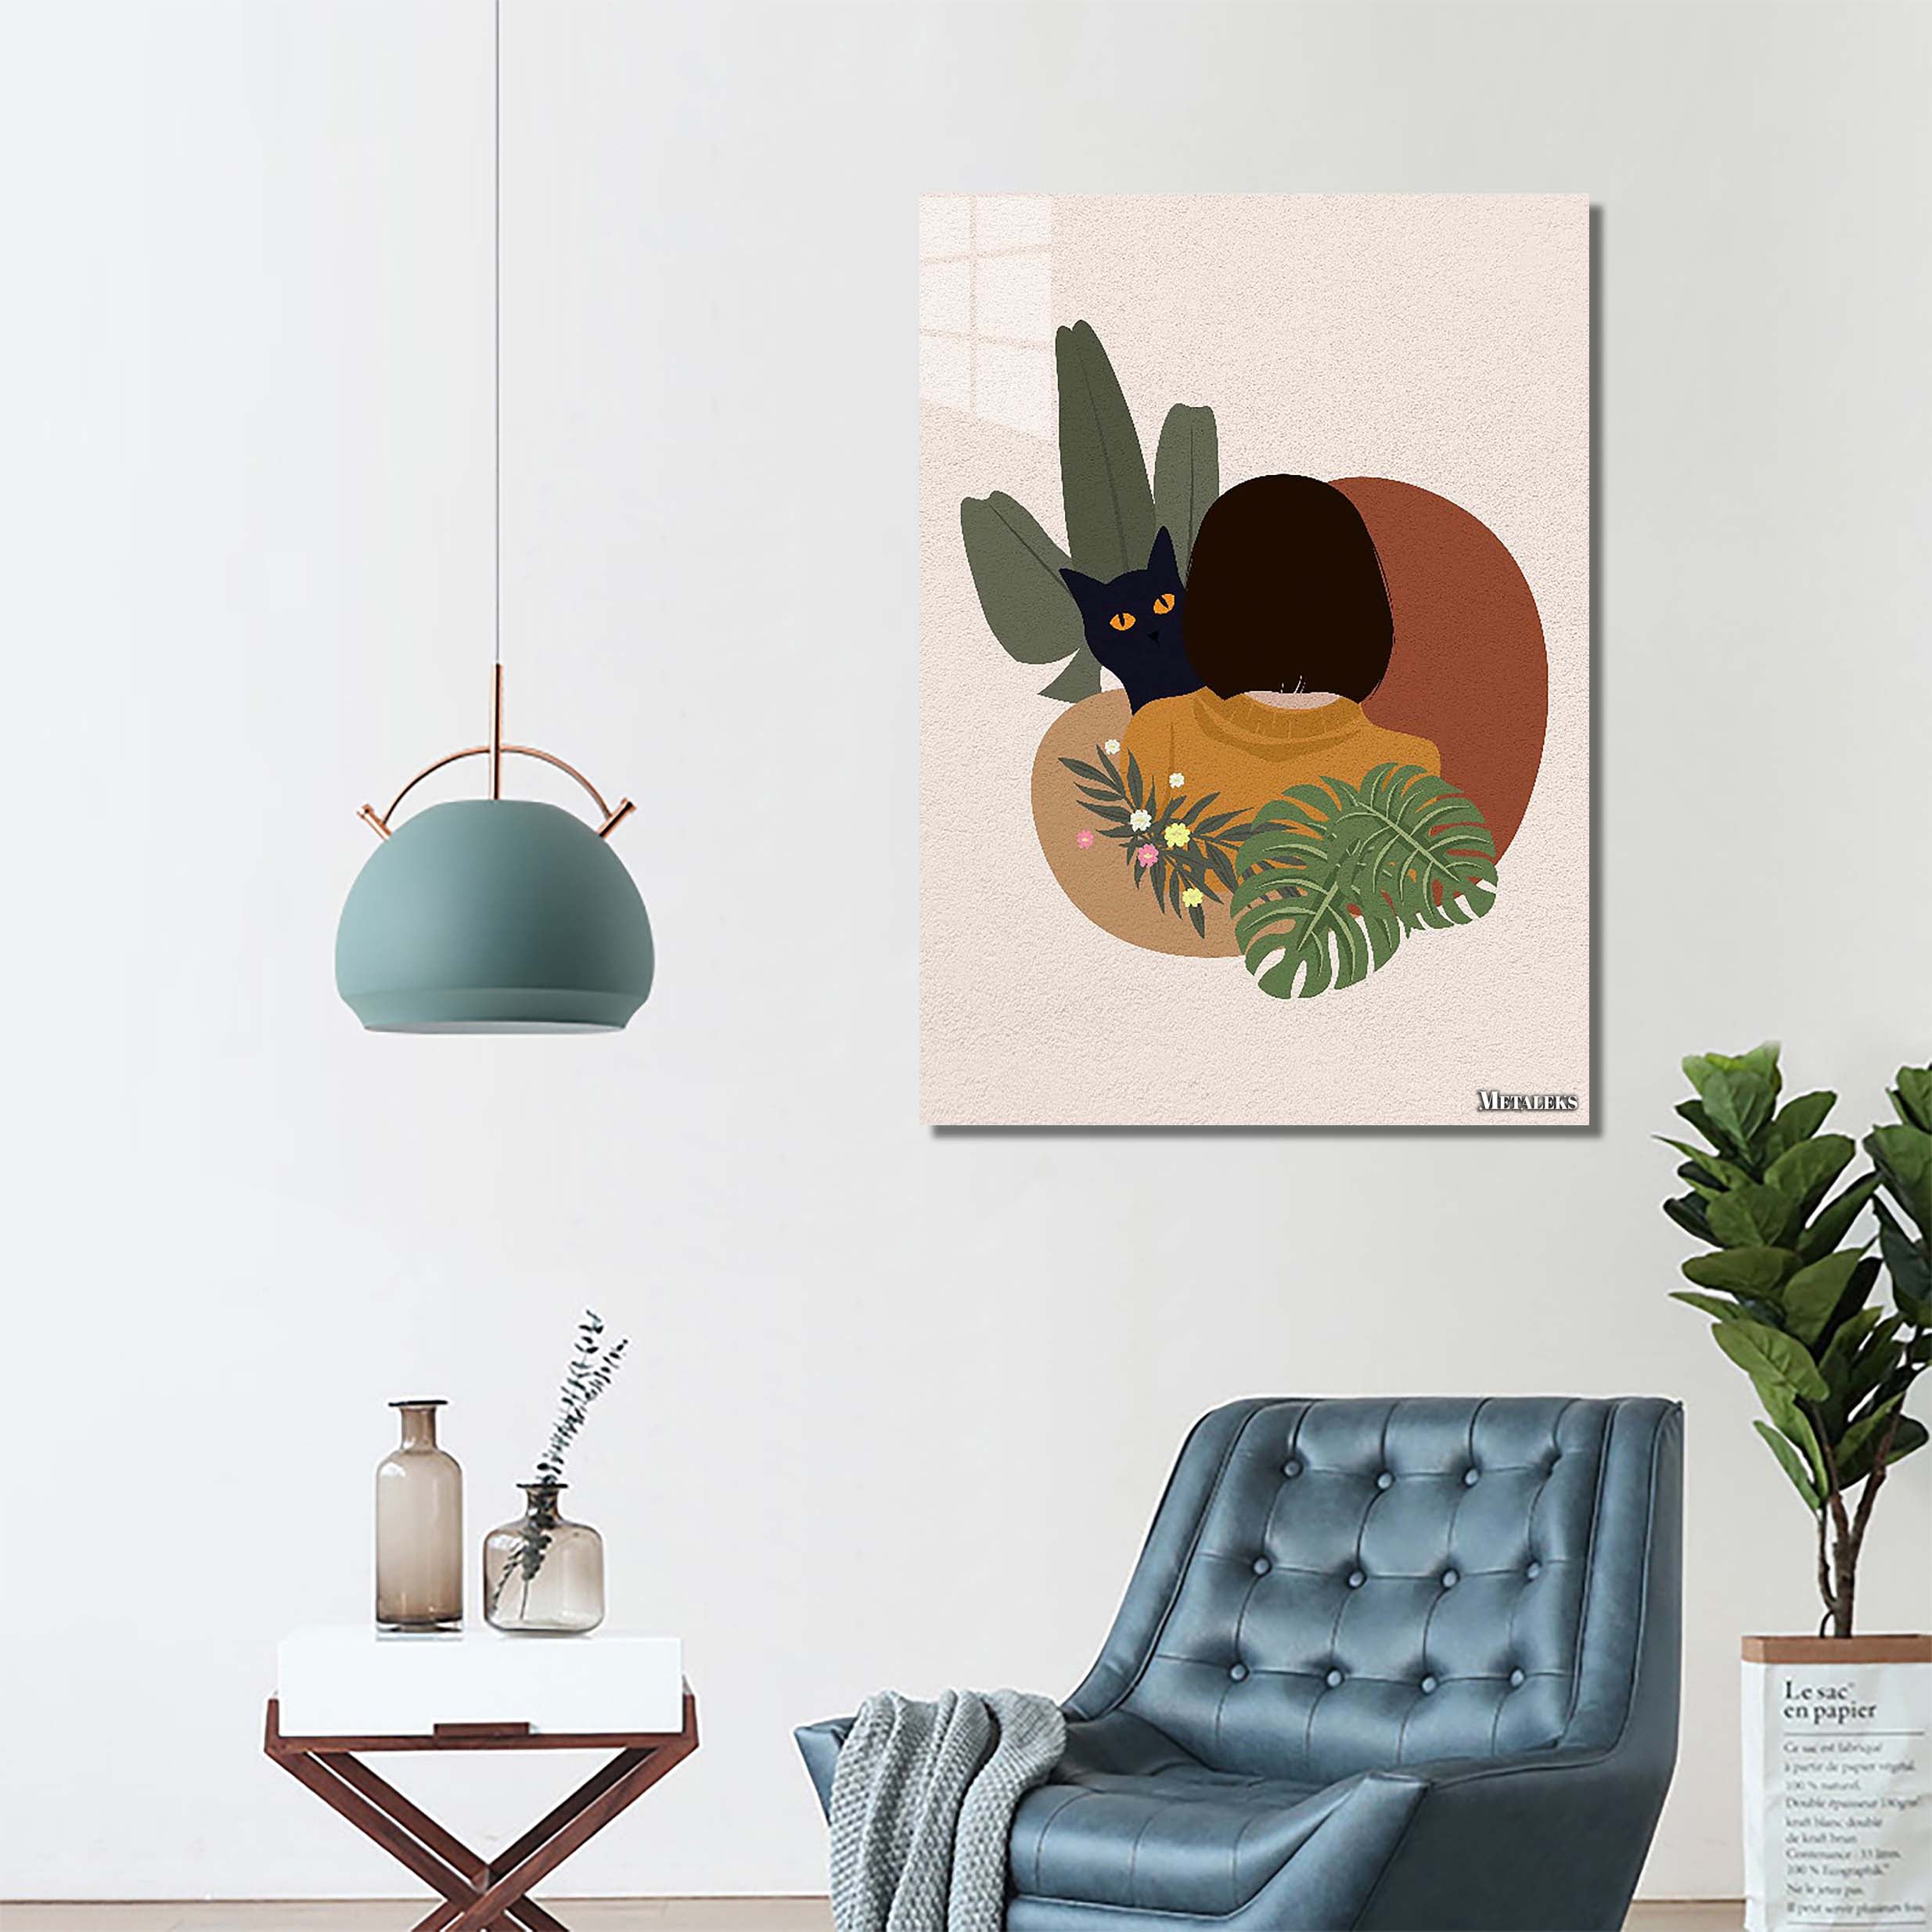 Minimal art cat and plant with beautiful woman-designed by @MINIMALUST